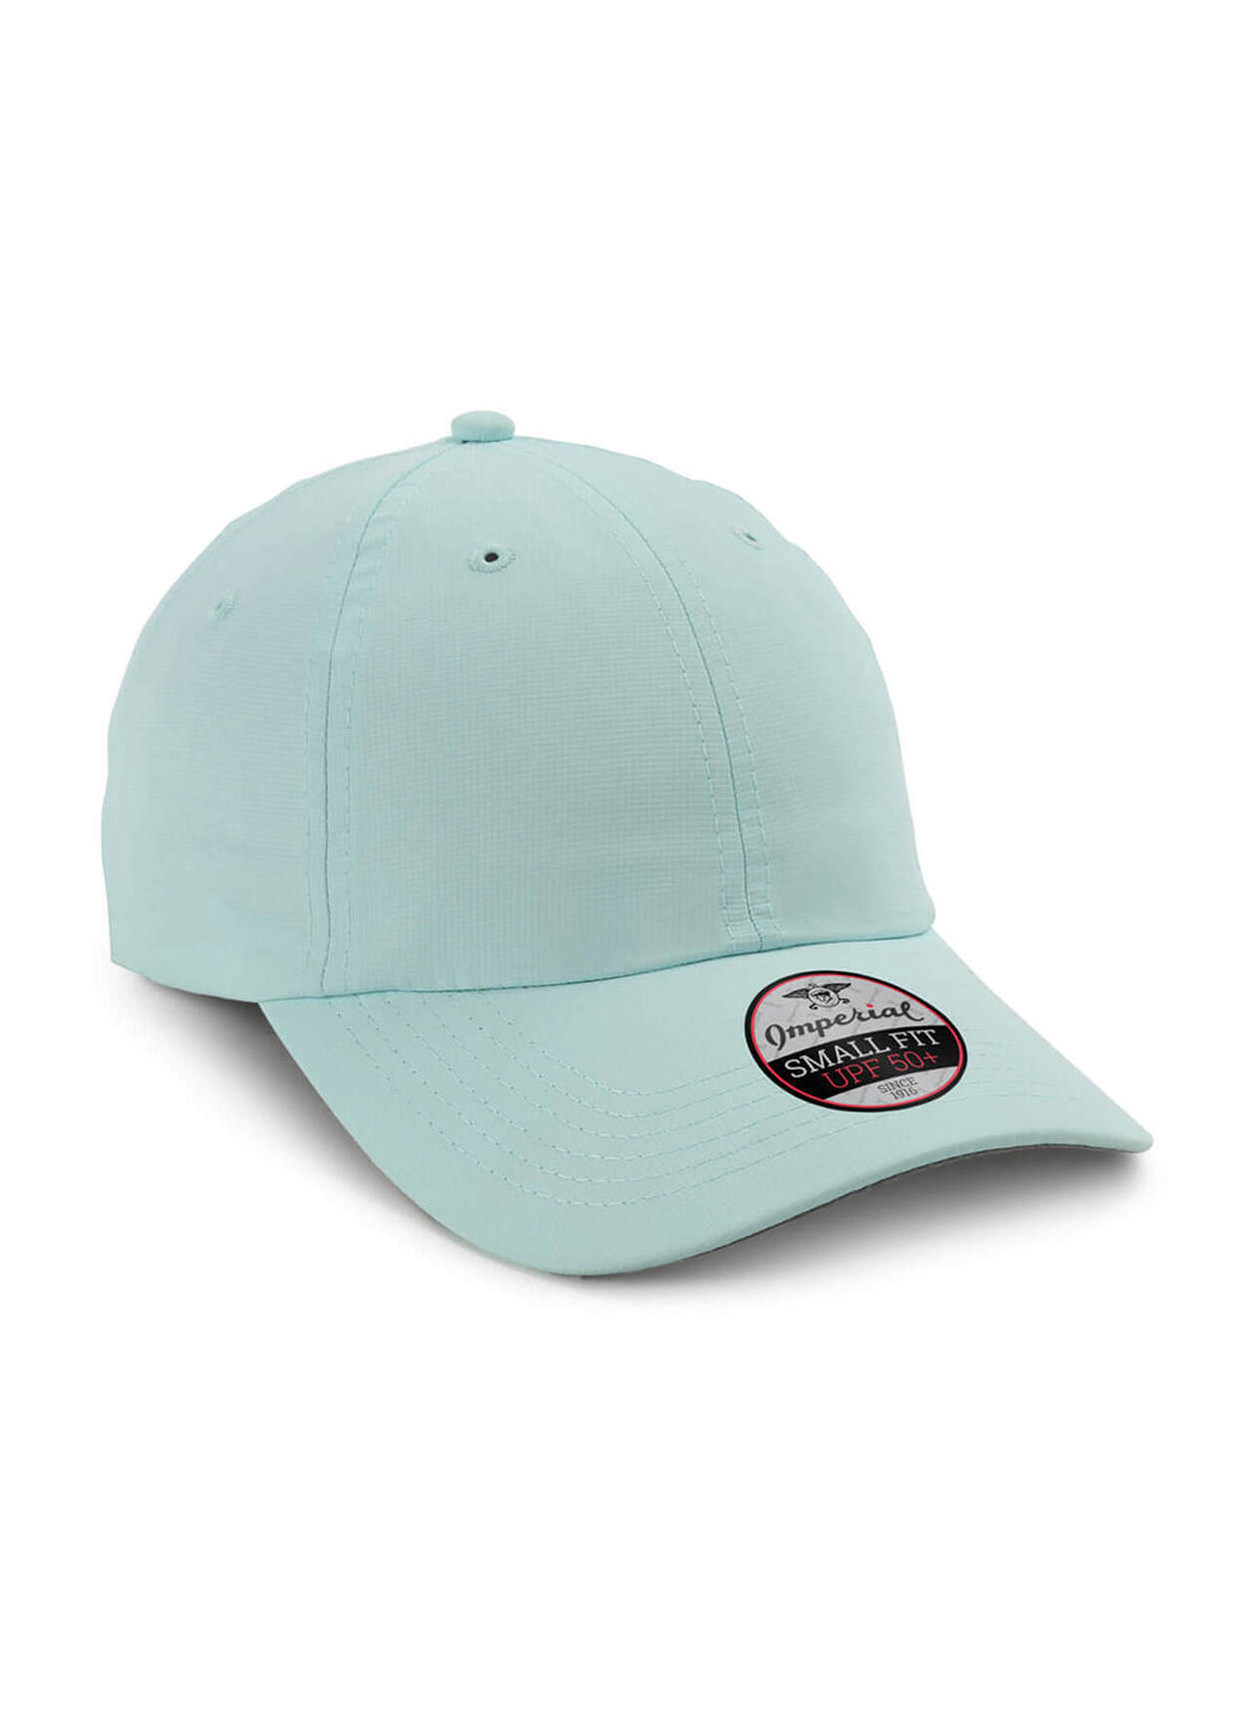 Imperial Robins Egg Original Small Fit Performance Hat